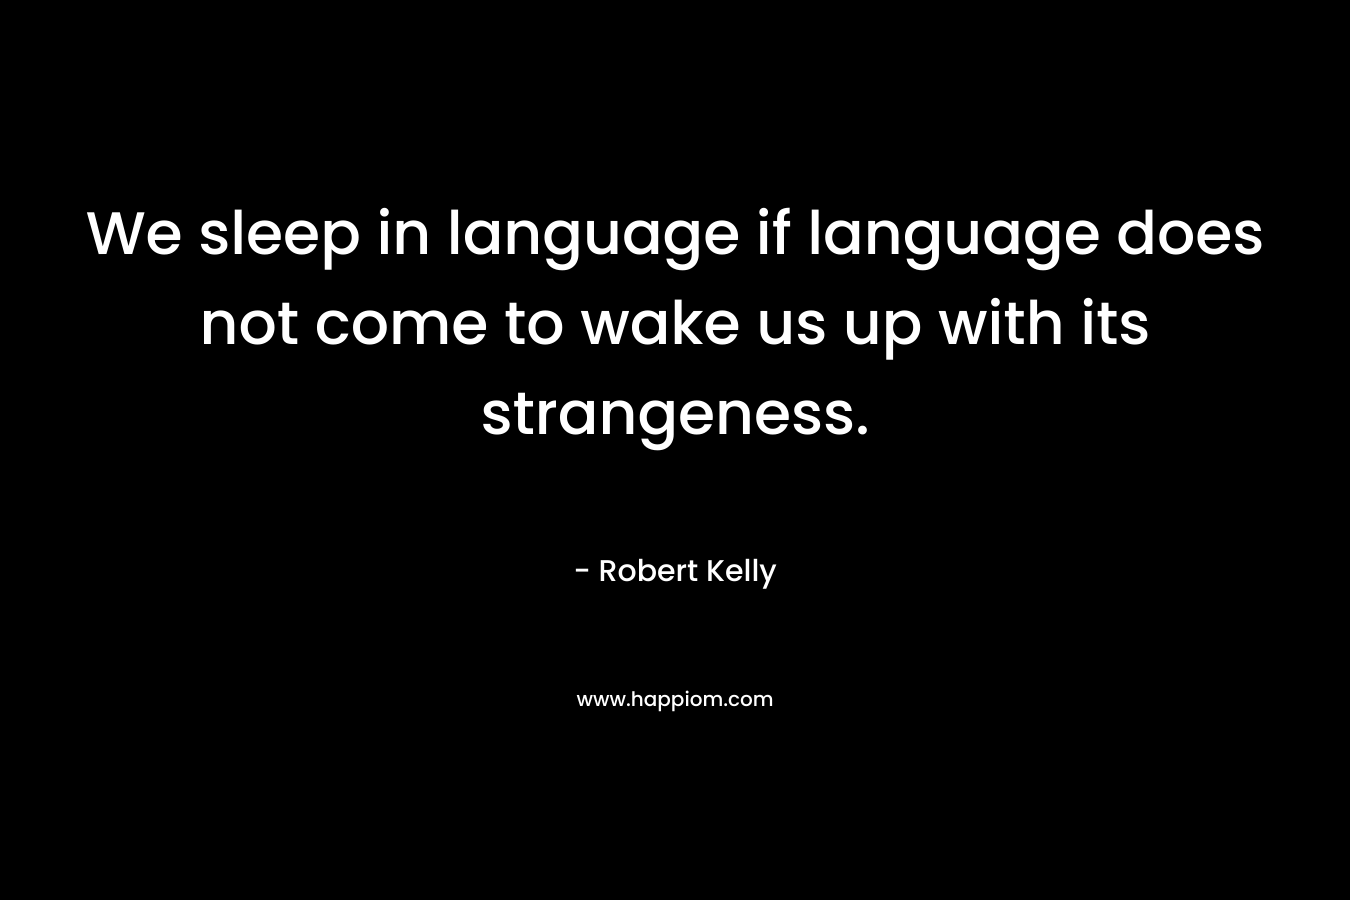 We sleep in language if language does not come to wake us up with its strangeness. – Robert Kelly